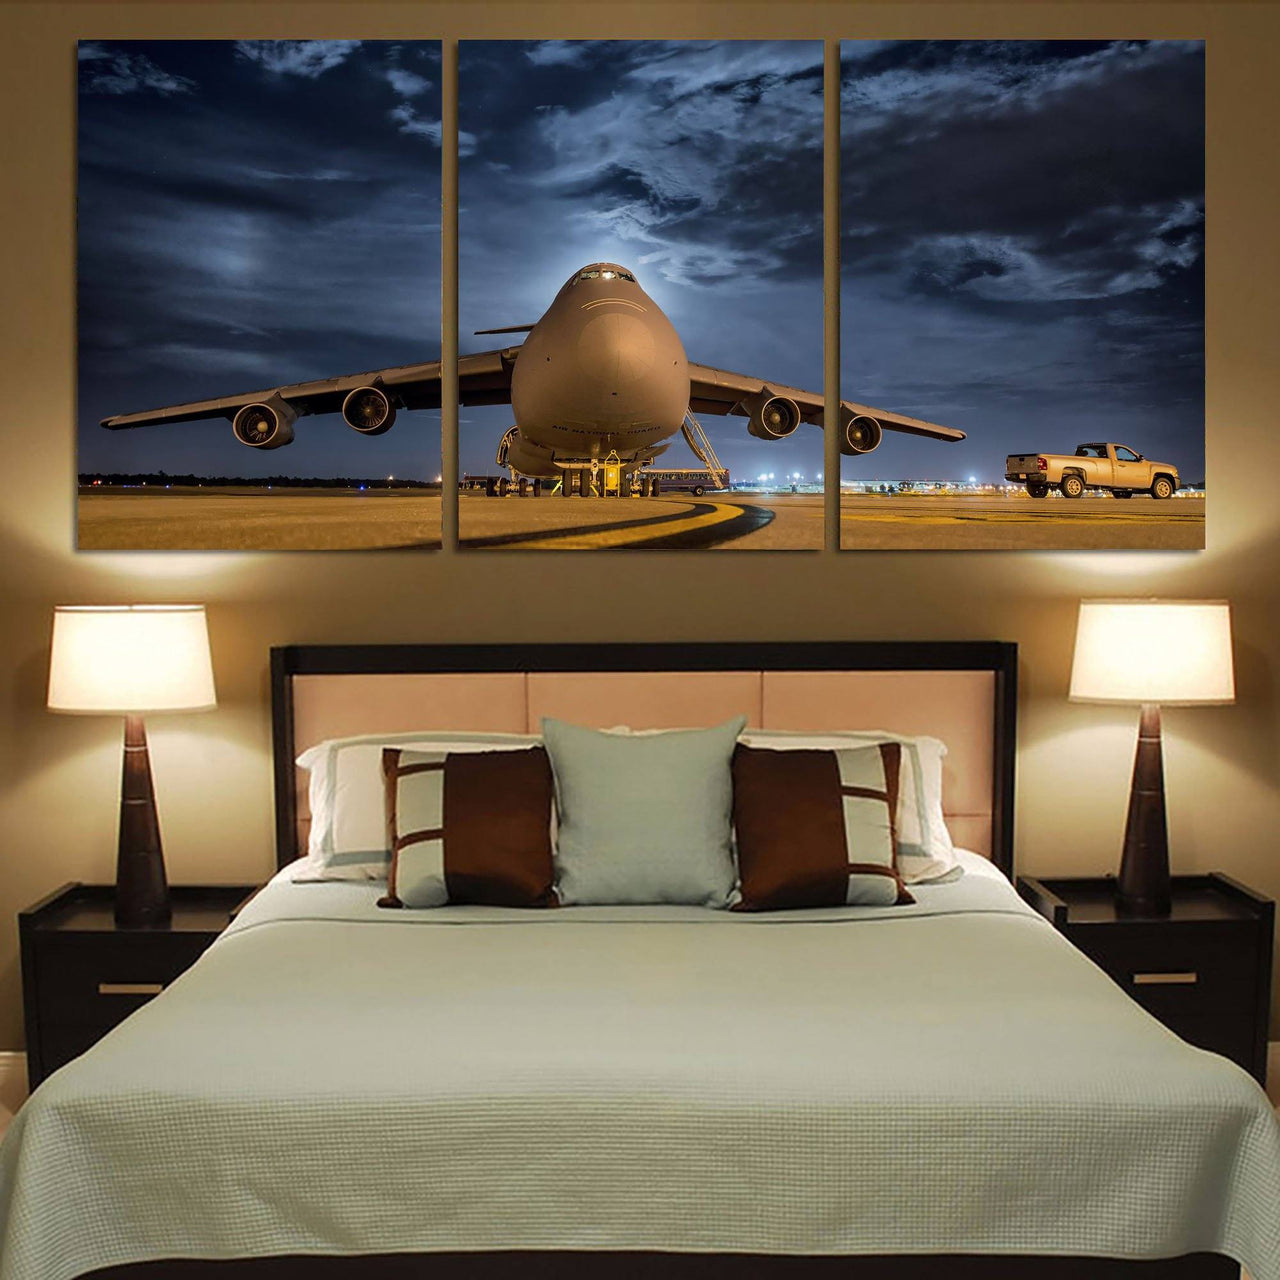 Amazing Military Aircraft at Night Printed Canvas Posters (3 Pieces) Aviation Shop 